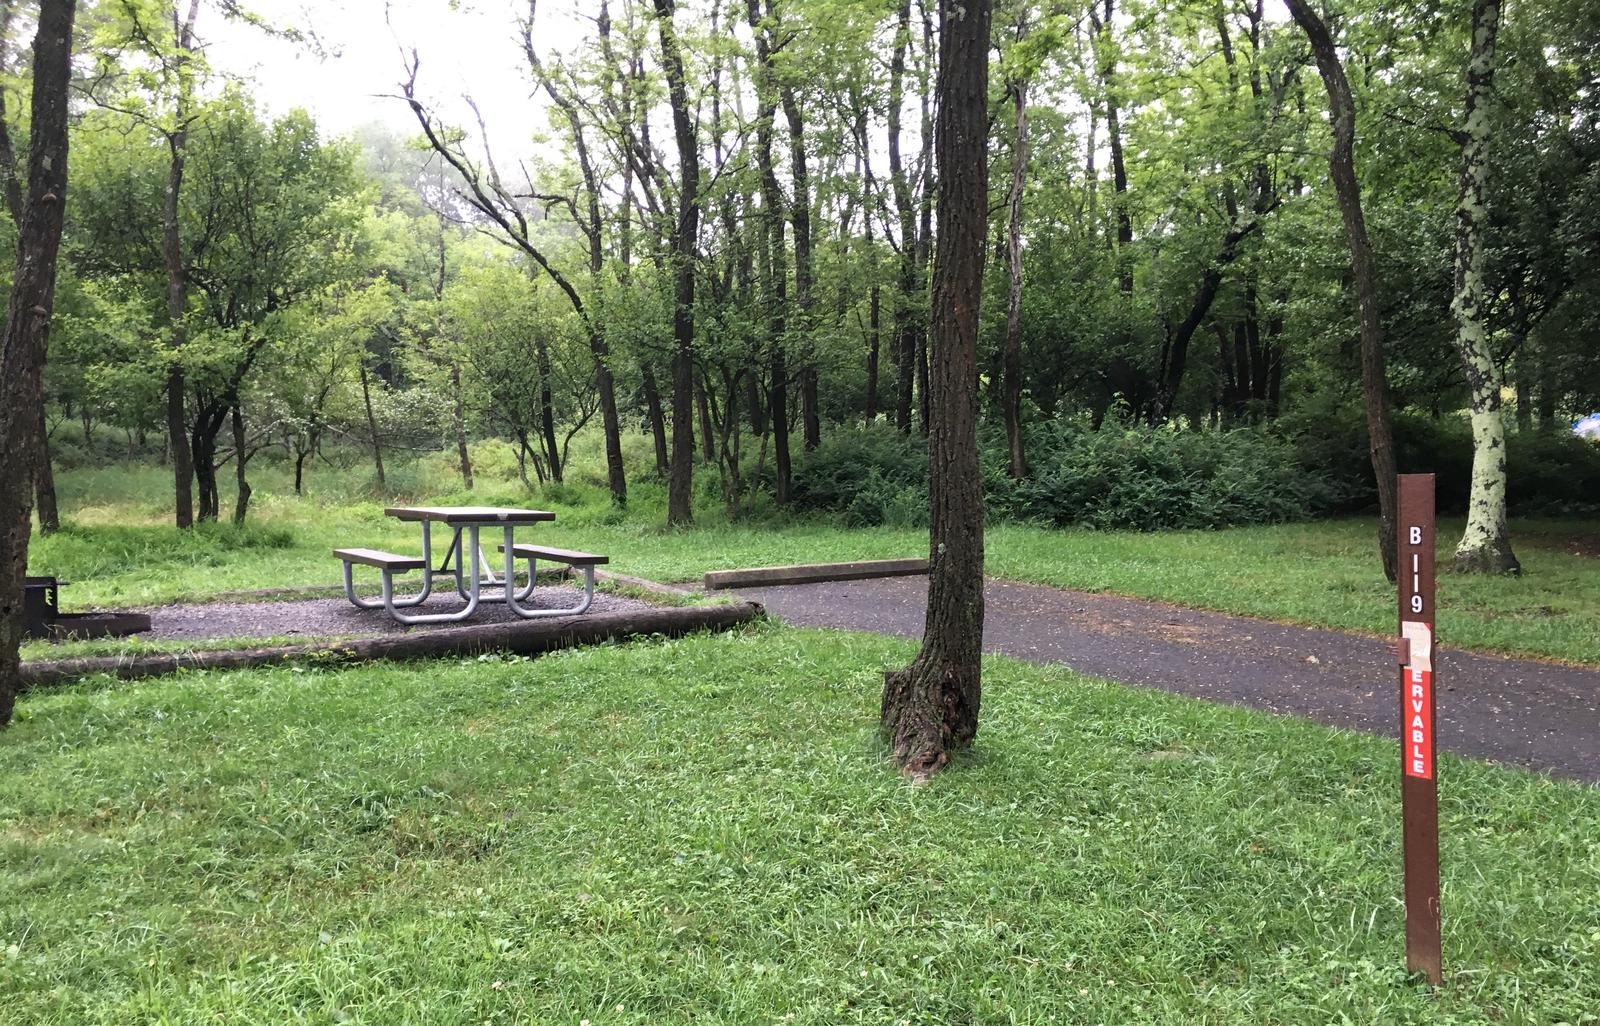 Campsite B119Site has a driveway, tent pad, picnic table, and fire pit. 